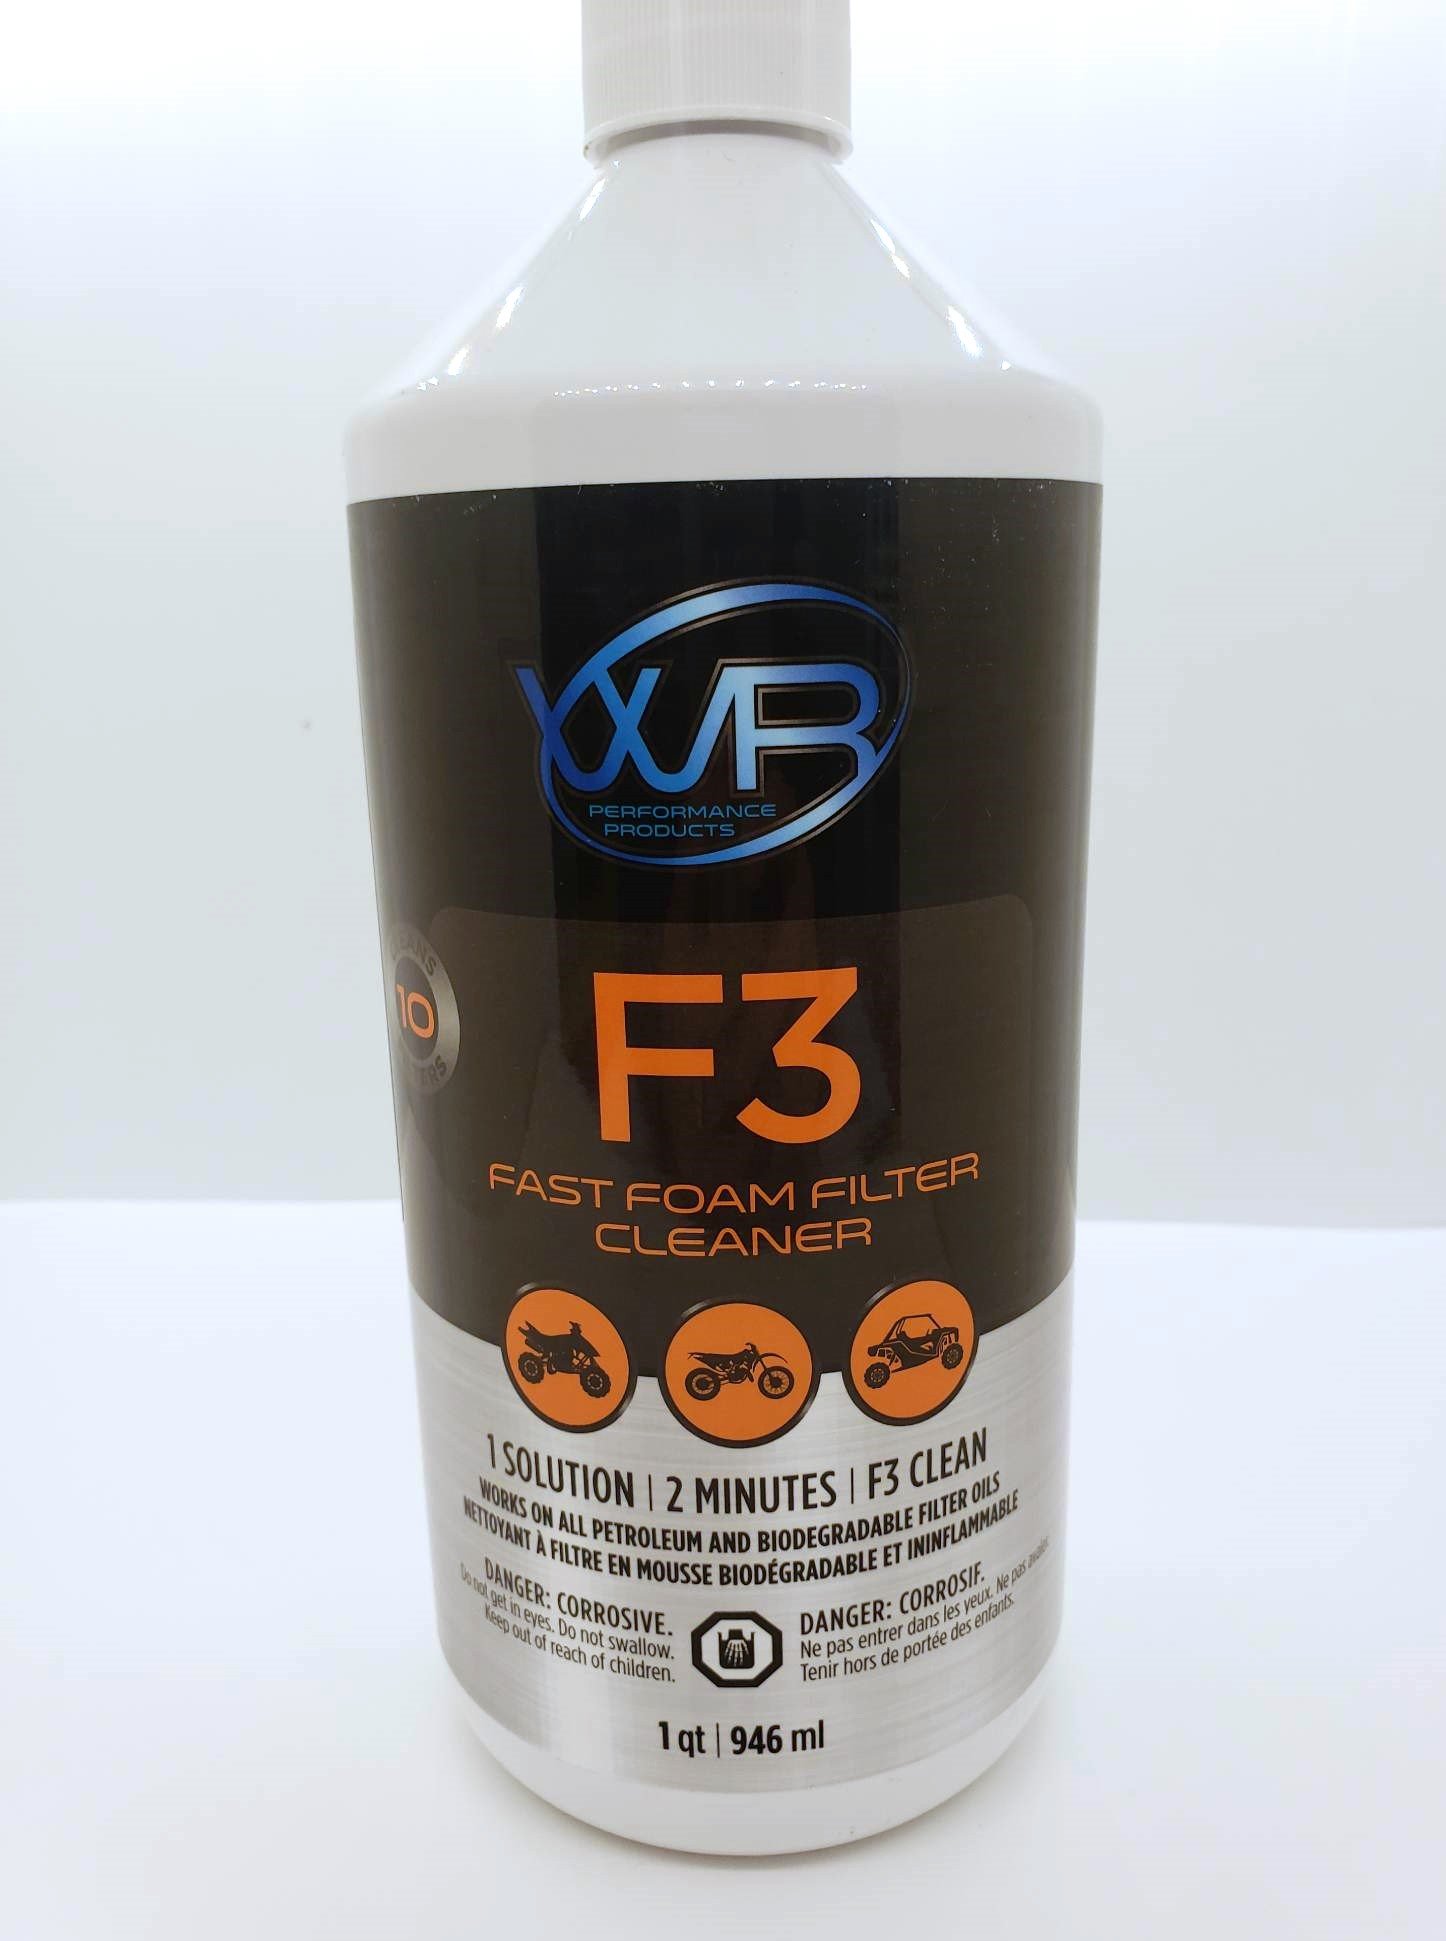 WR Performance Products F3 Filter Cleaner Review! On the shelves at  Speedin' Motorsports early next week! #2minutes #onlythebest #cleanair, By Speedin' Motorsports